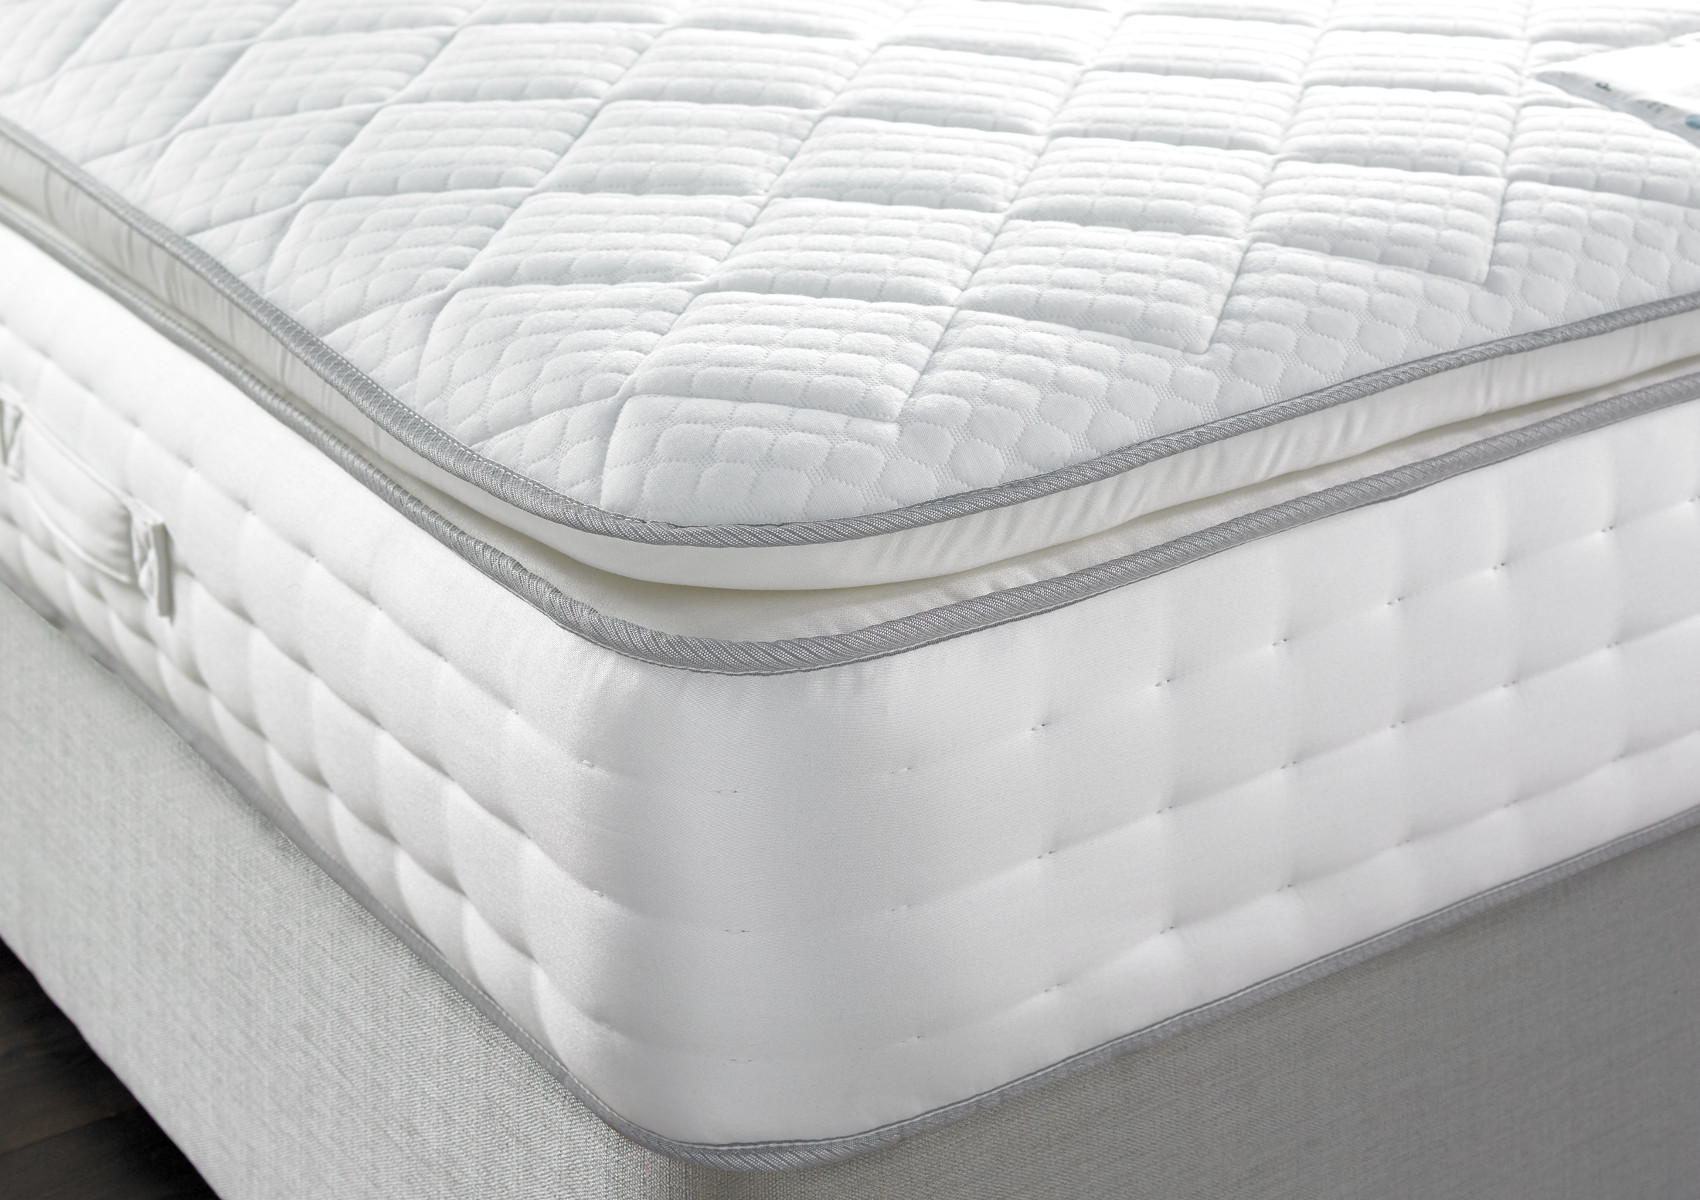 View Sleep Sanctuary Plush 1500 Pocket Natural Pillow Top Quilted Mattress Time4Sleep information